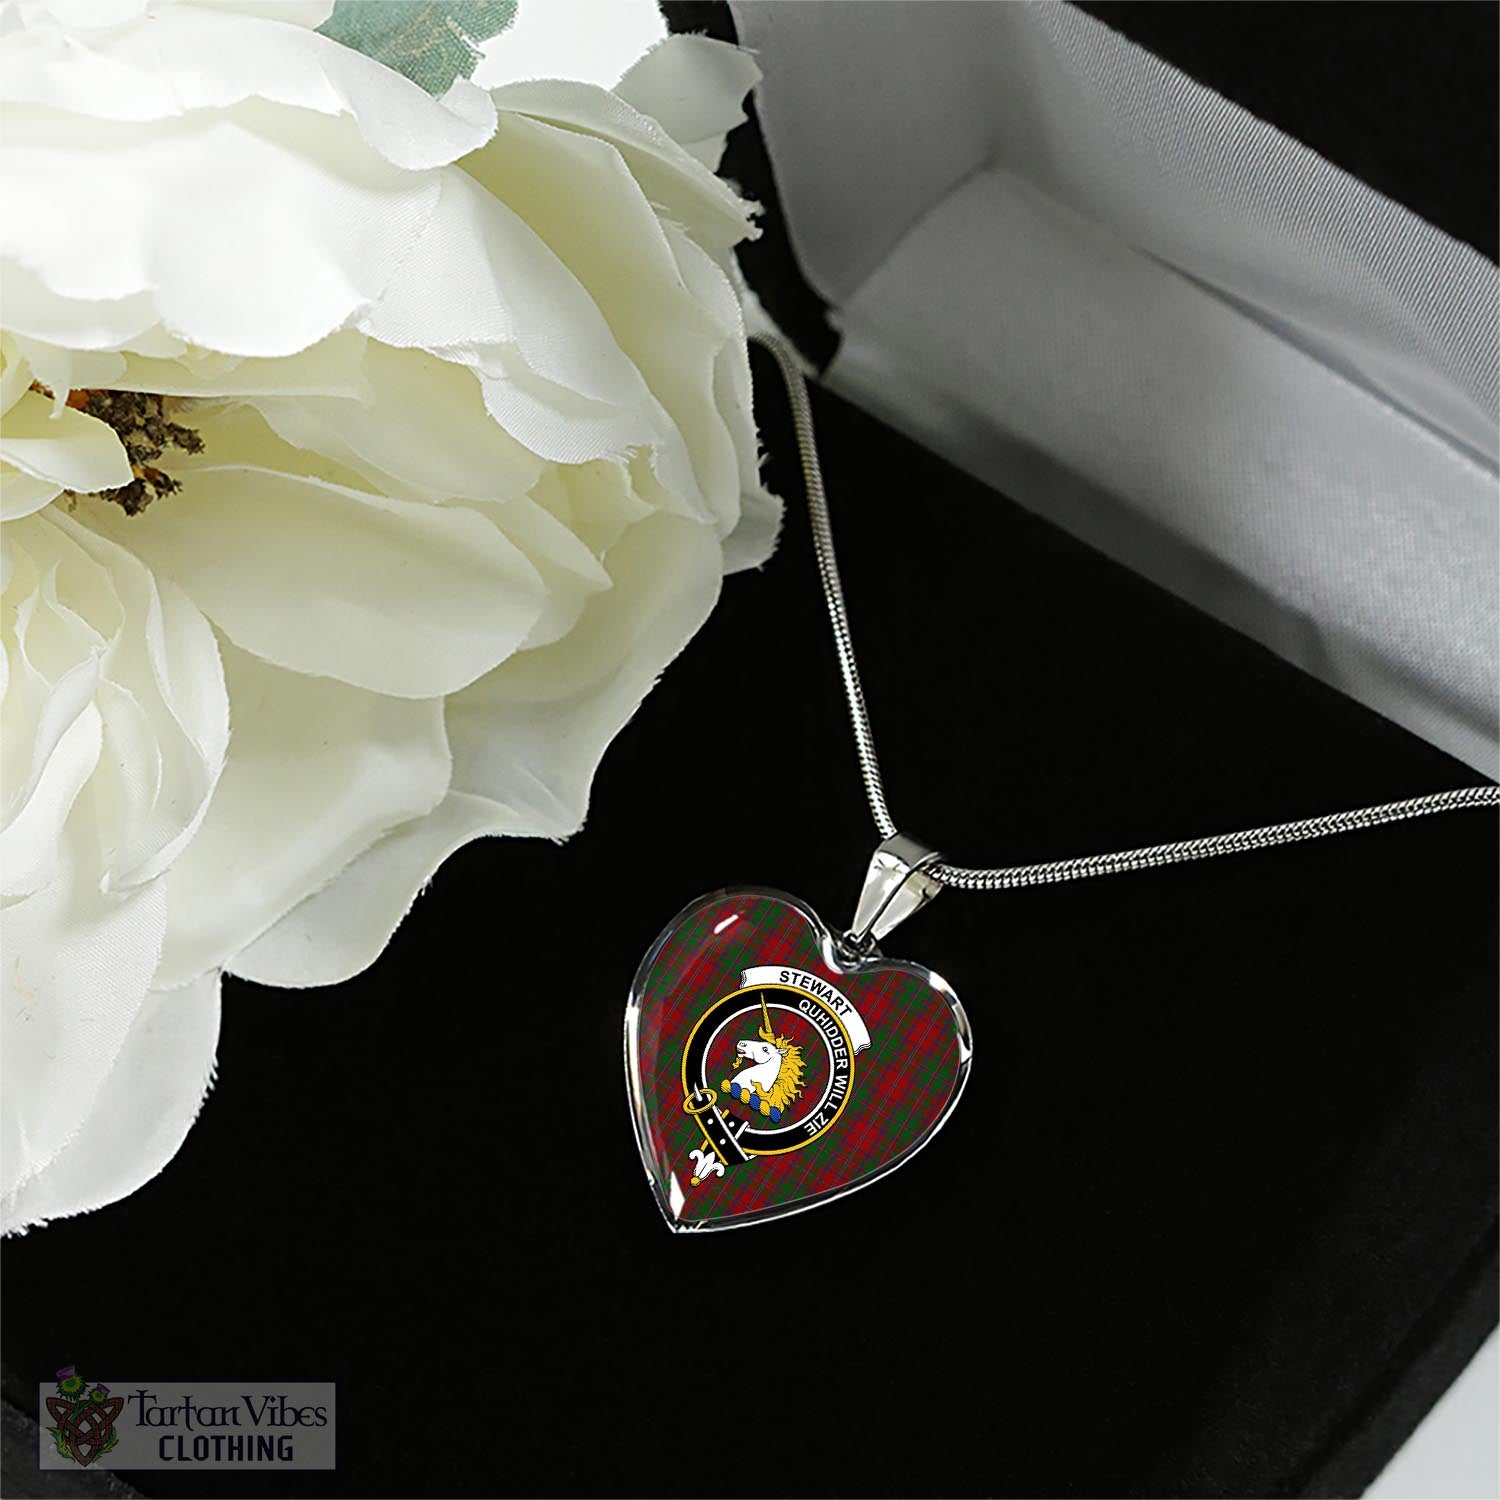 Tartan Vibes Clothing Stewart of Appin Tartan Heart Necklace with Family Crest